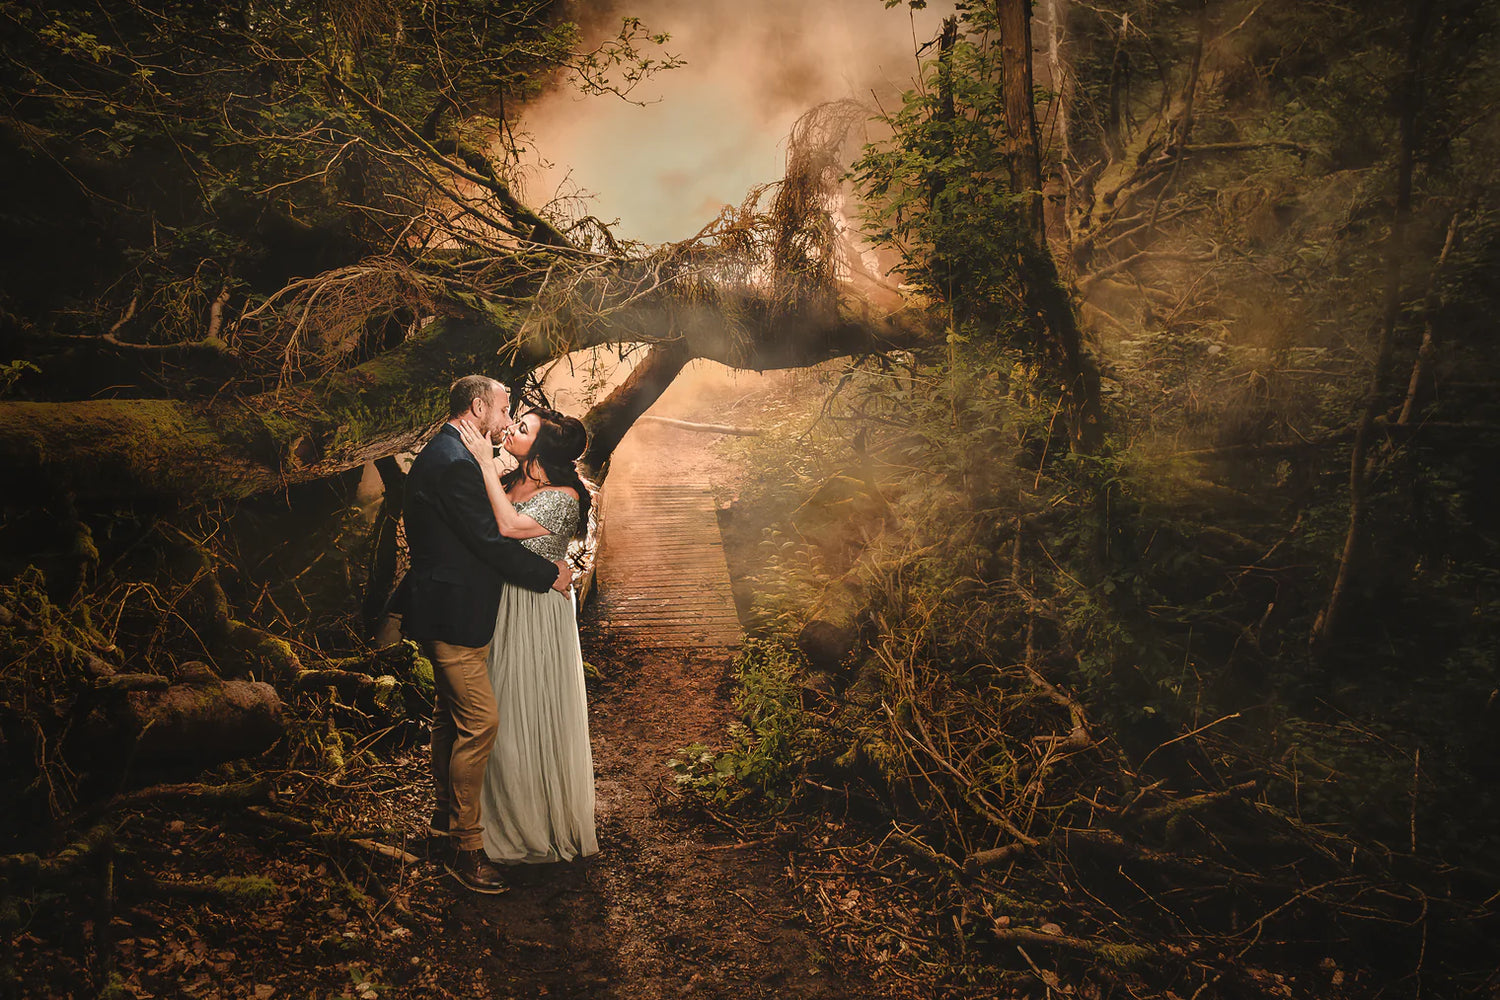 Photo of a couple kissing in a whimsical scene in the woods, taken by photographer Kevin Wyllie